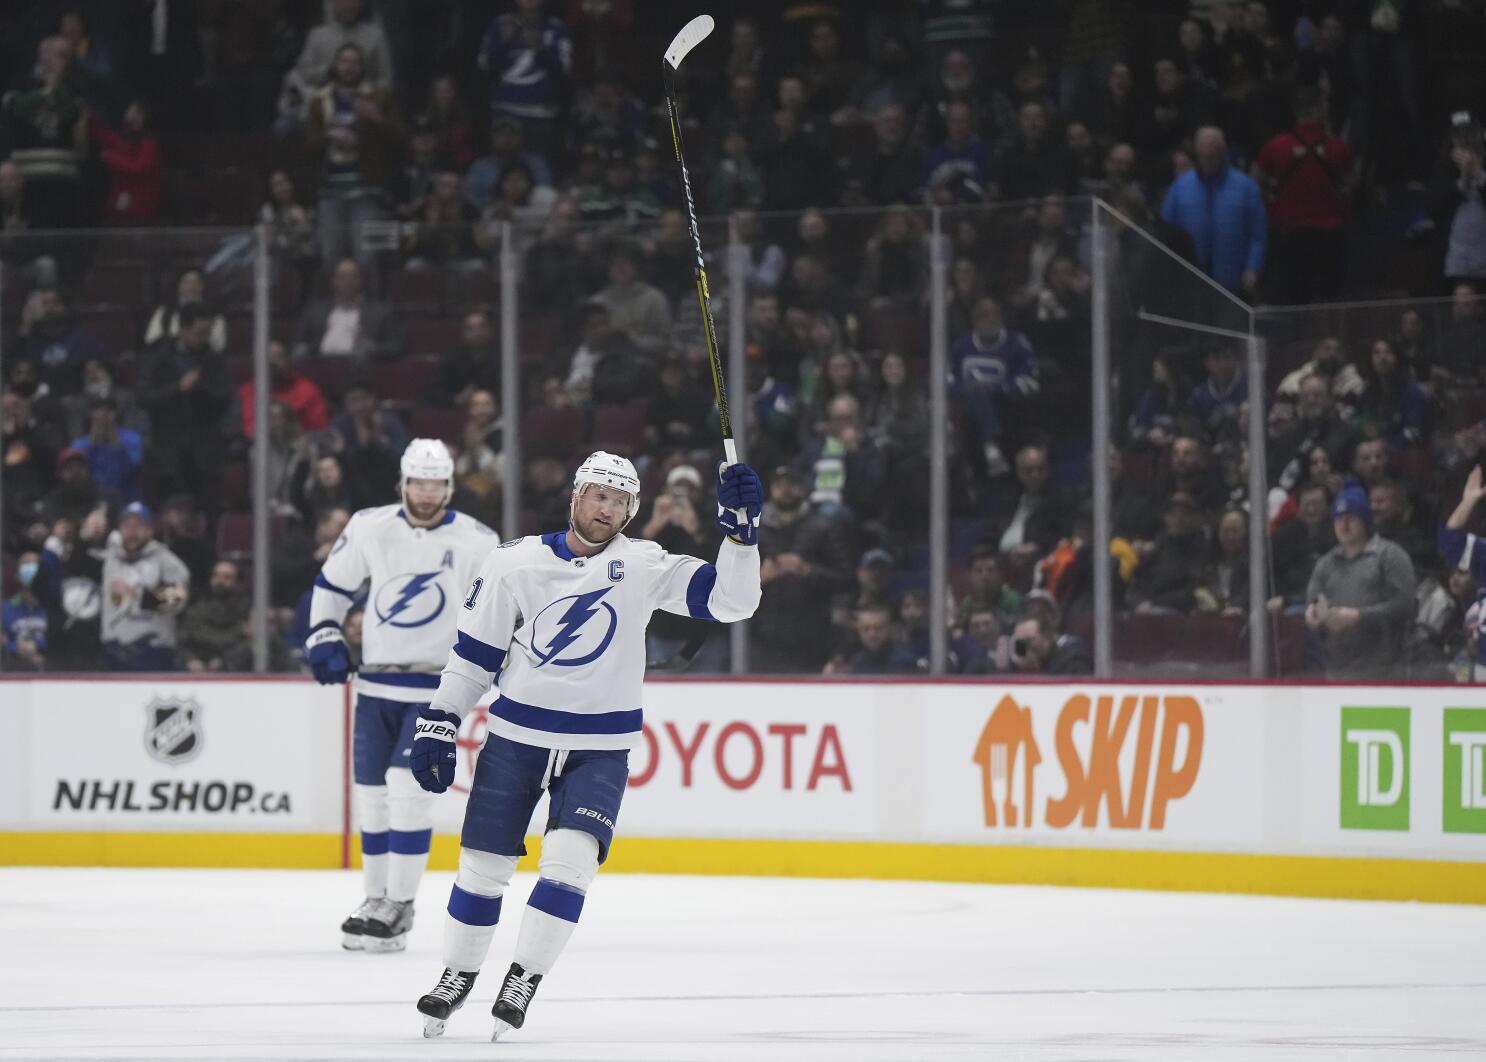 Why take Stamkos over Crosby or Toews? Goals are still the goal in